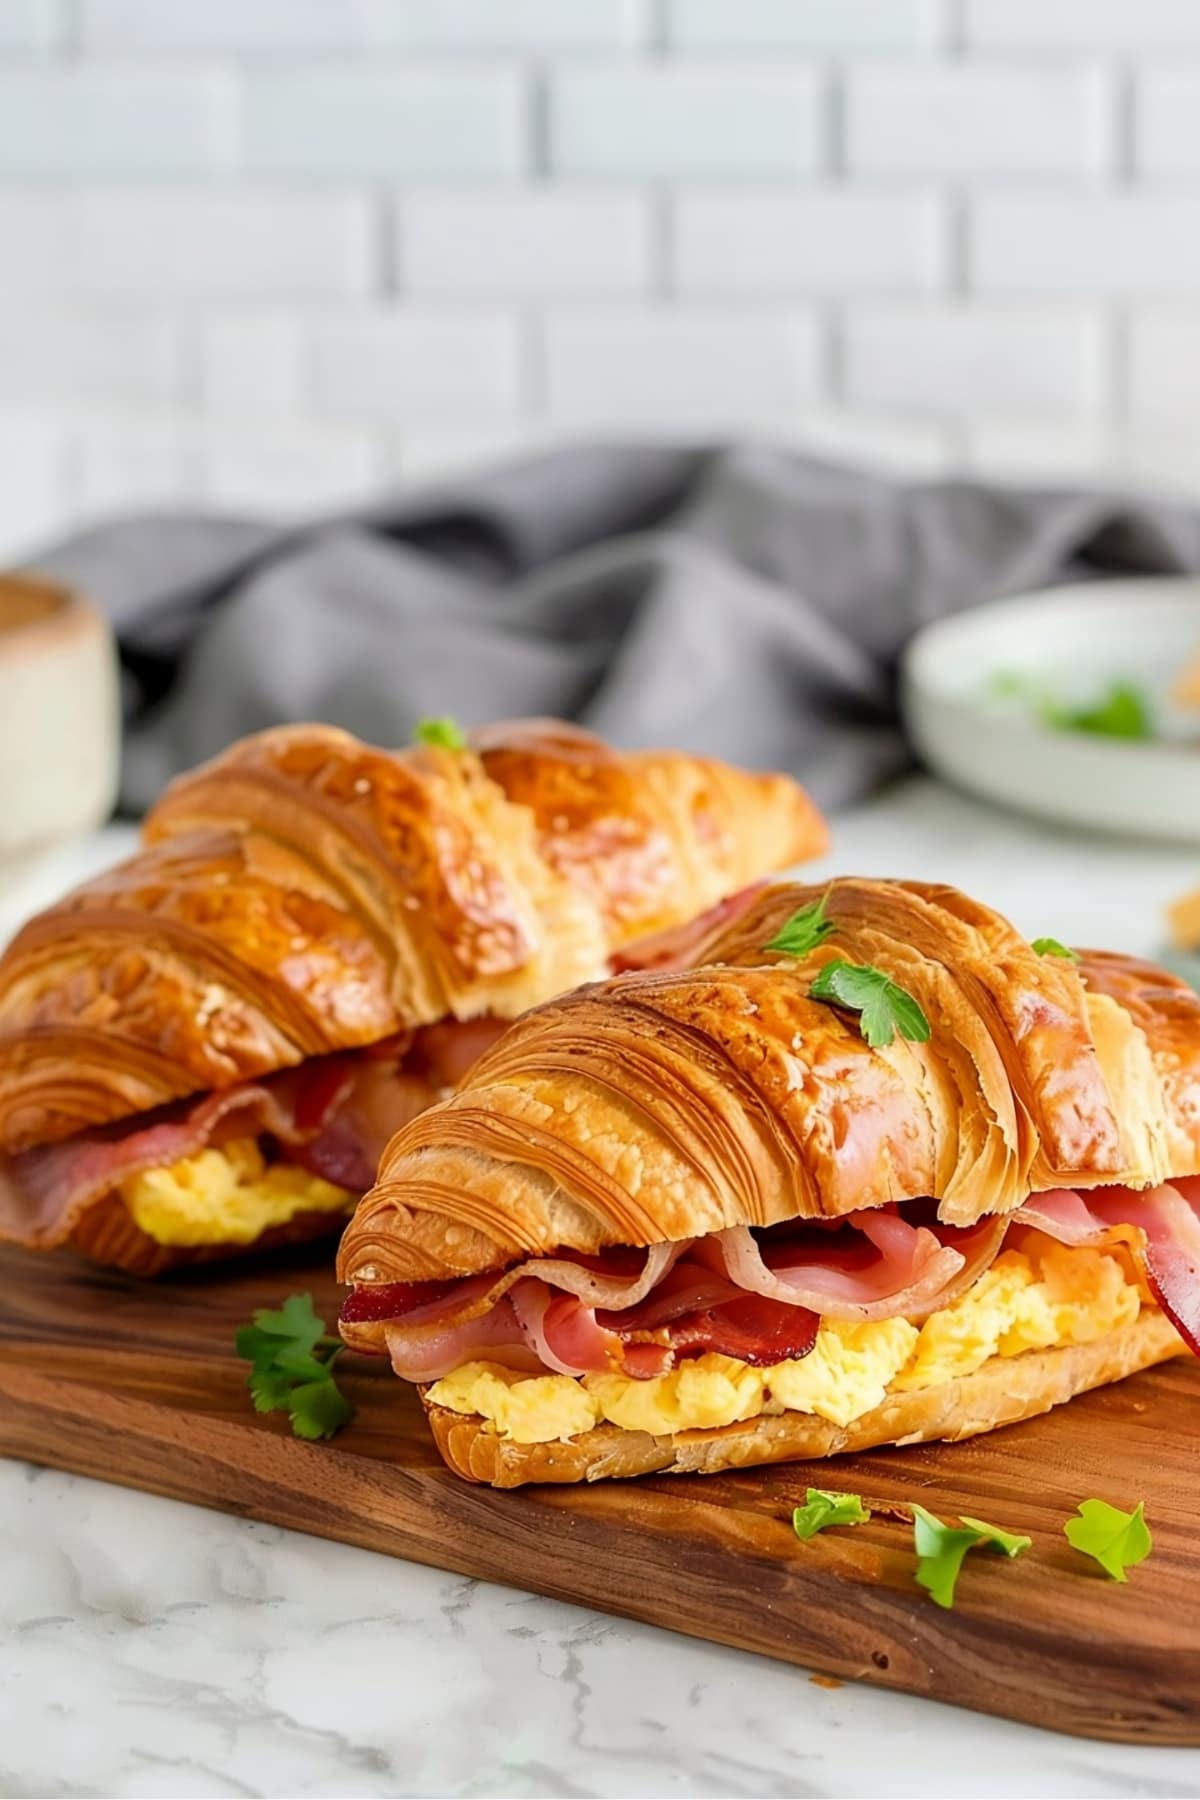 Croissant breakfast sandwich with scrambled eggs, bacon and cheese